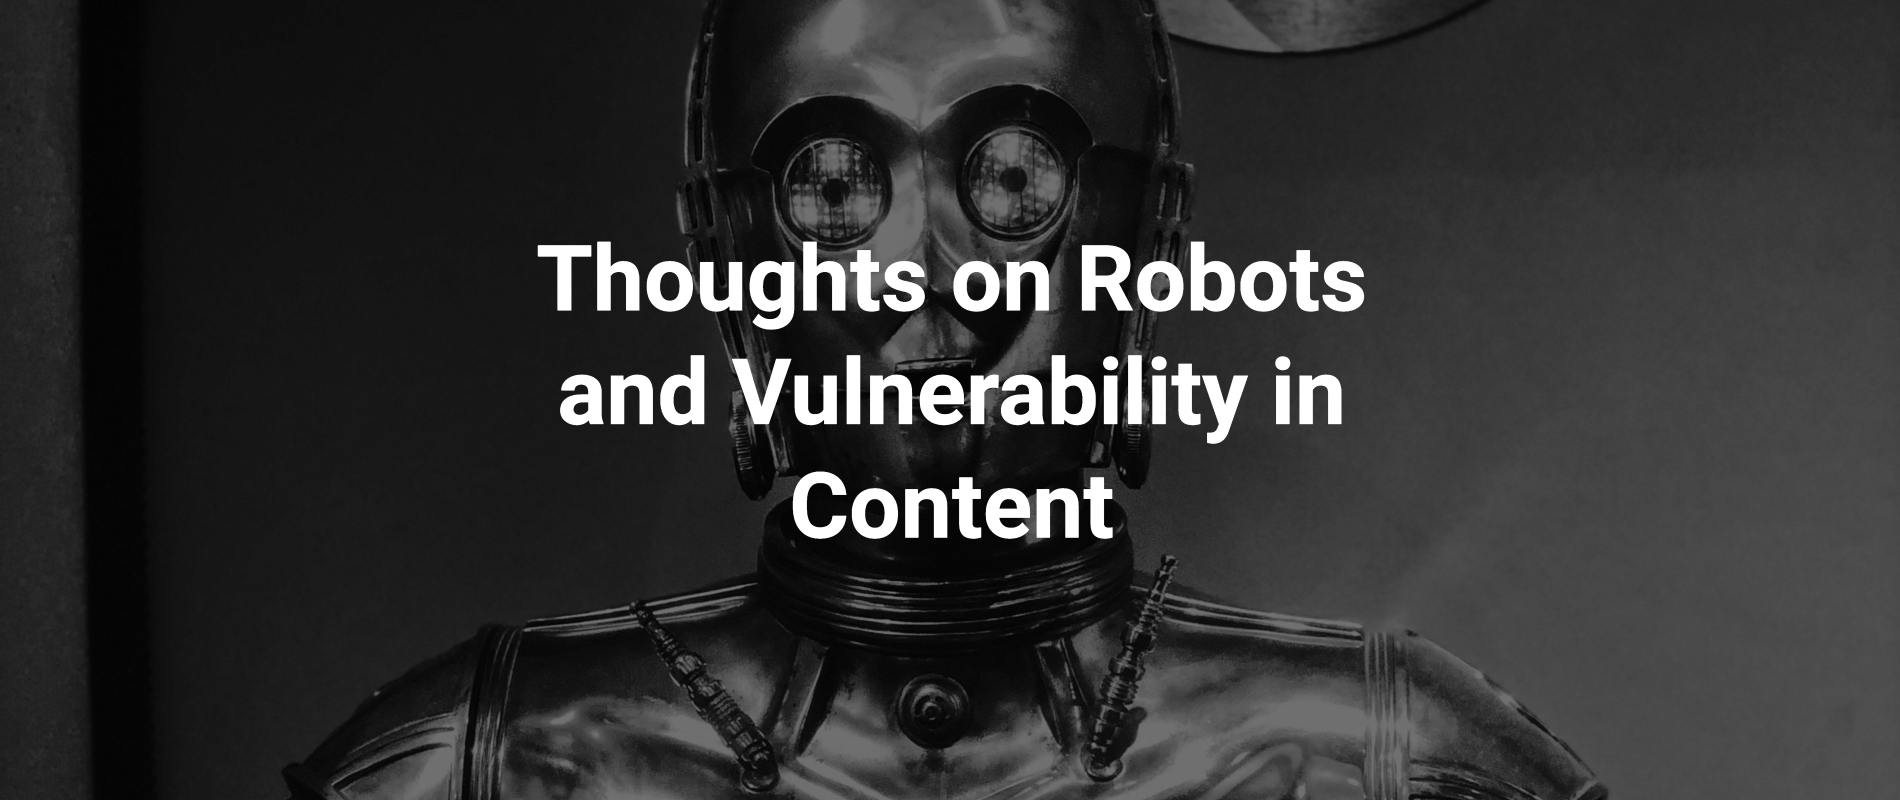 Thoughts on Robots and Vulnerability in Content